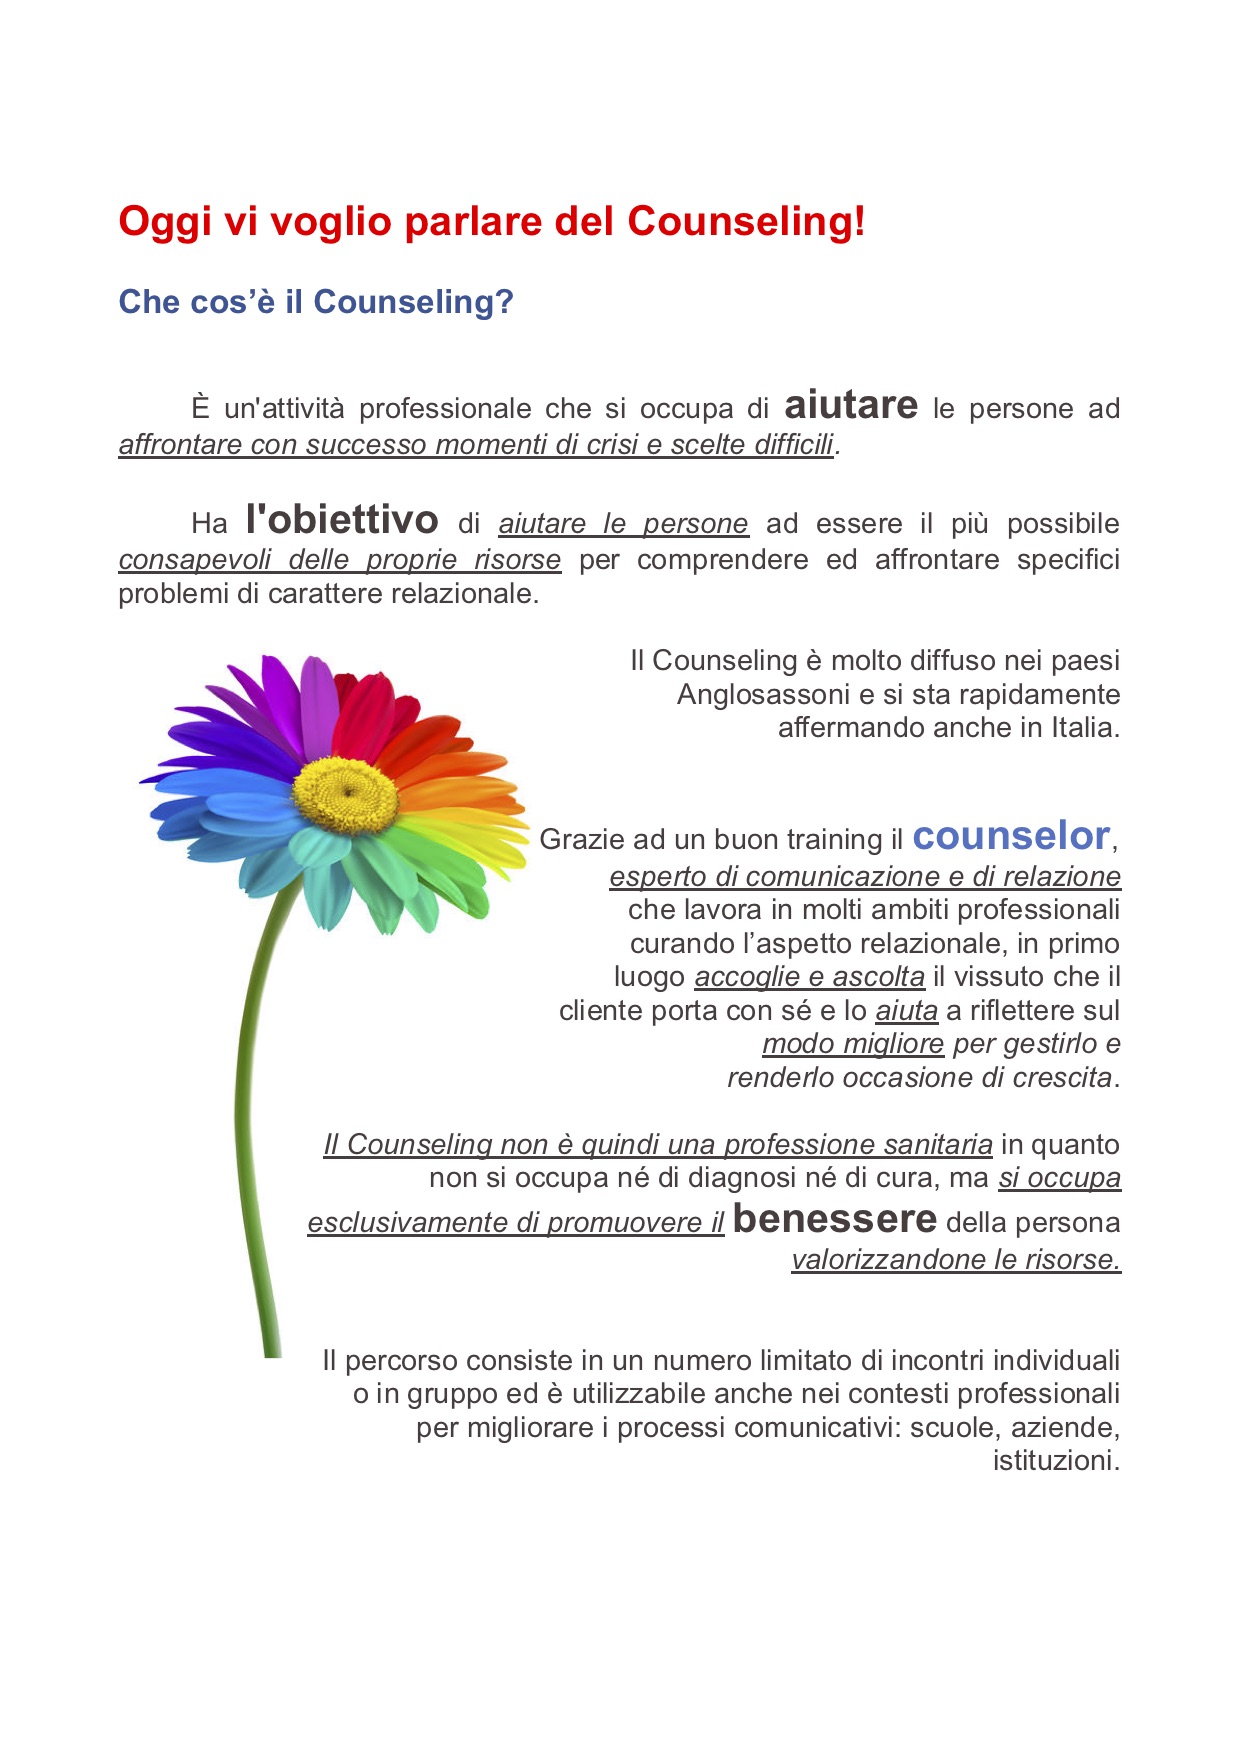 USARCI LETTERA COUNSELING 1 bis